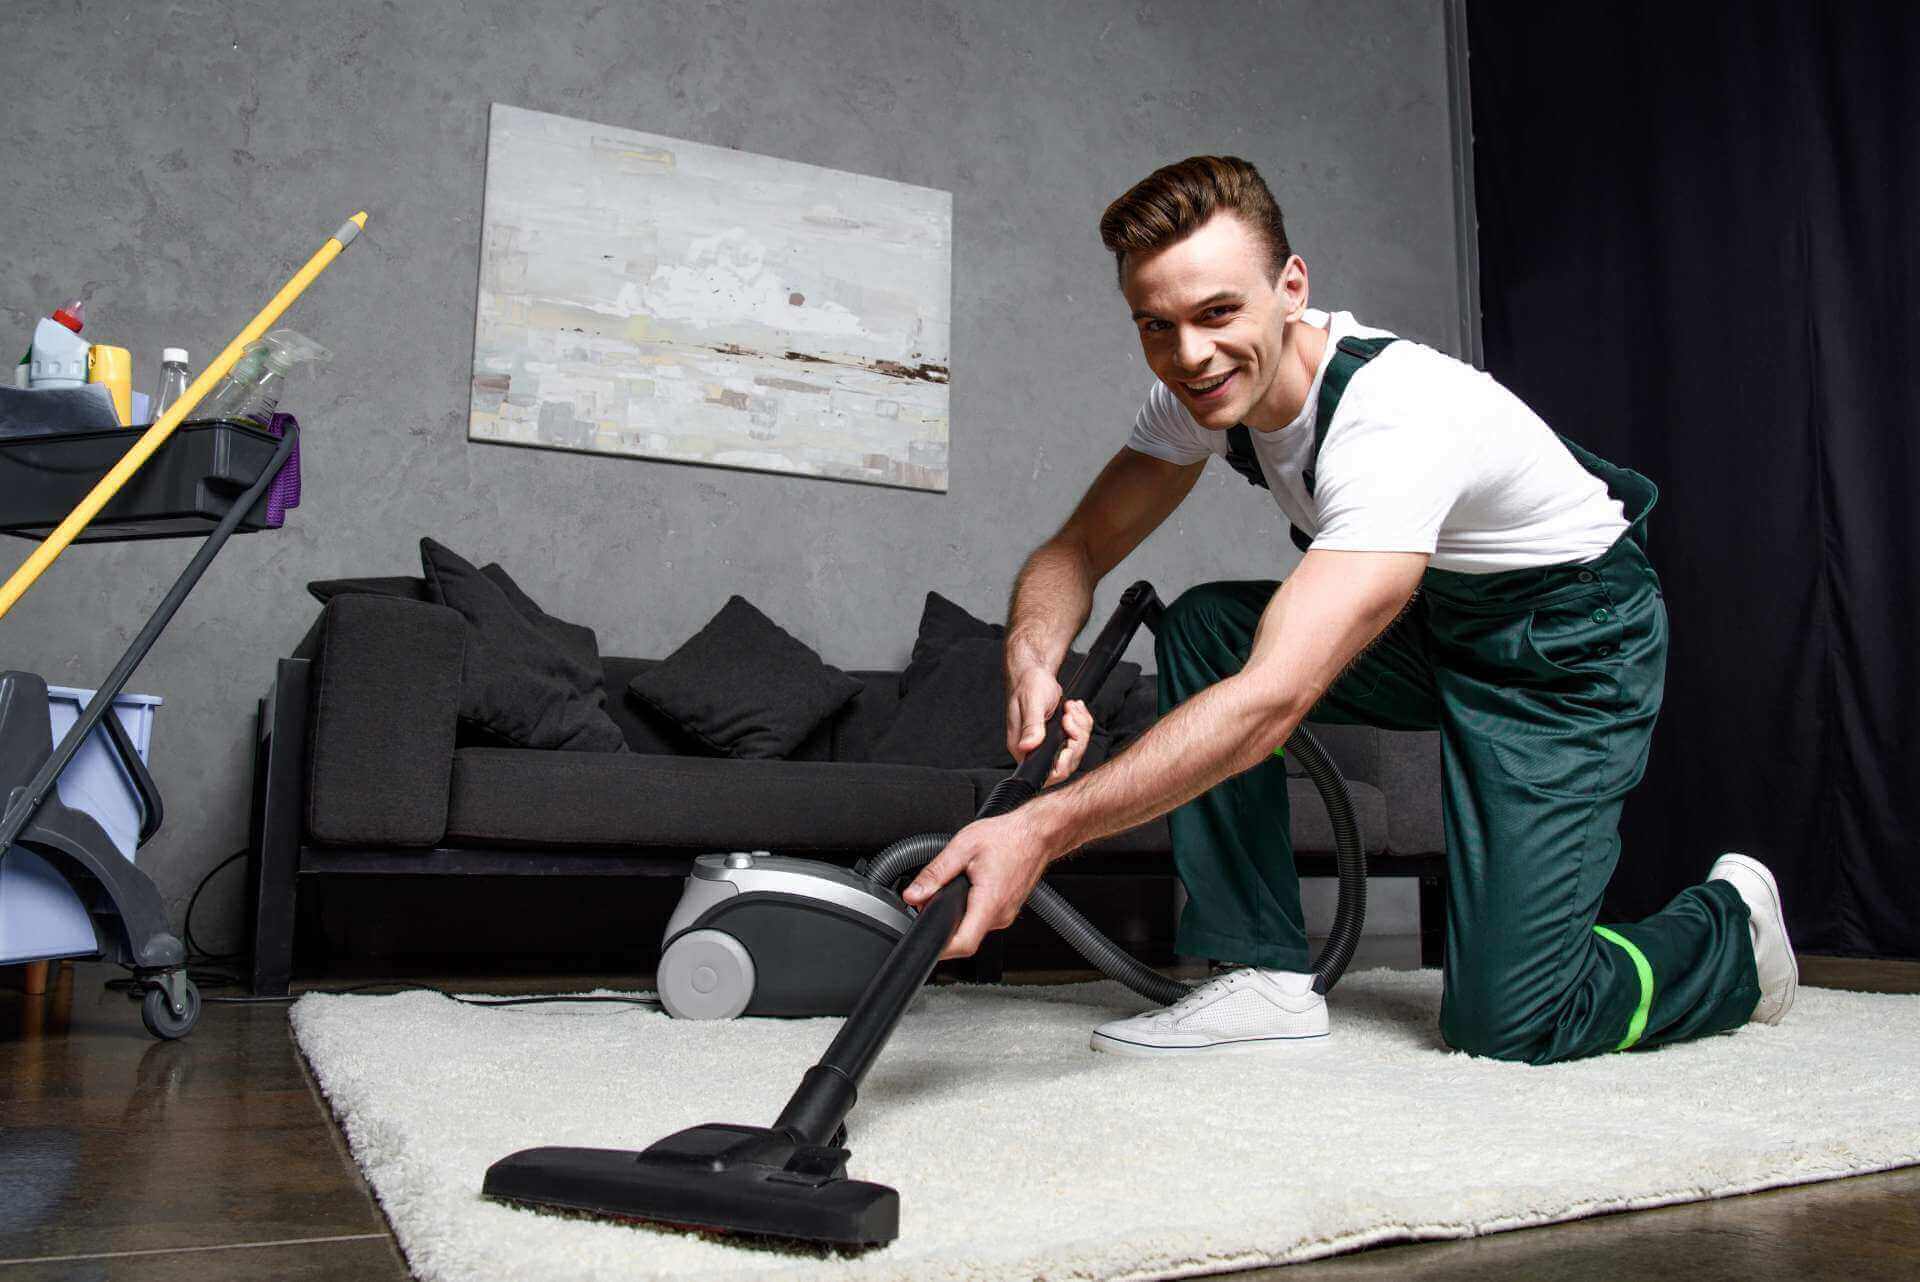 professional cleaning services for businesses and commercial spaces